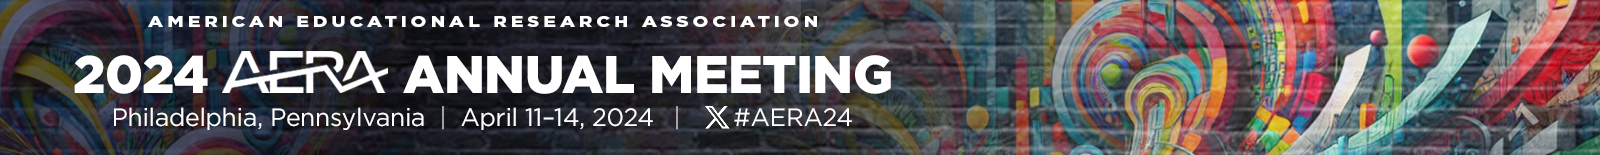 2024 Annual Meeting Banner image